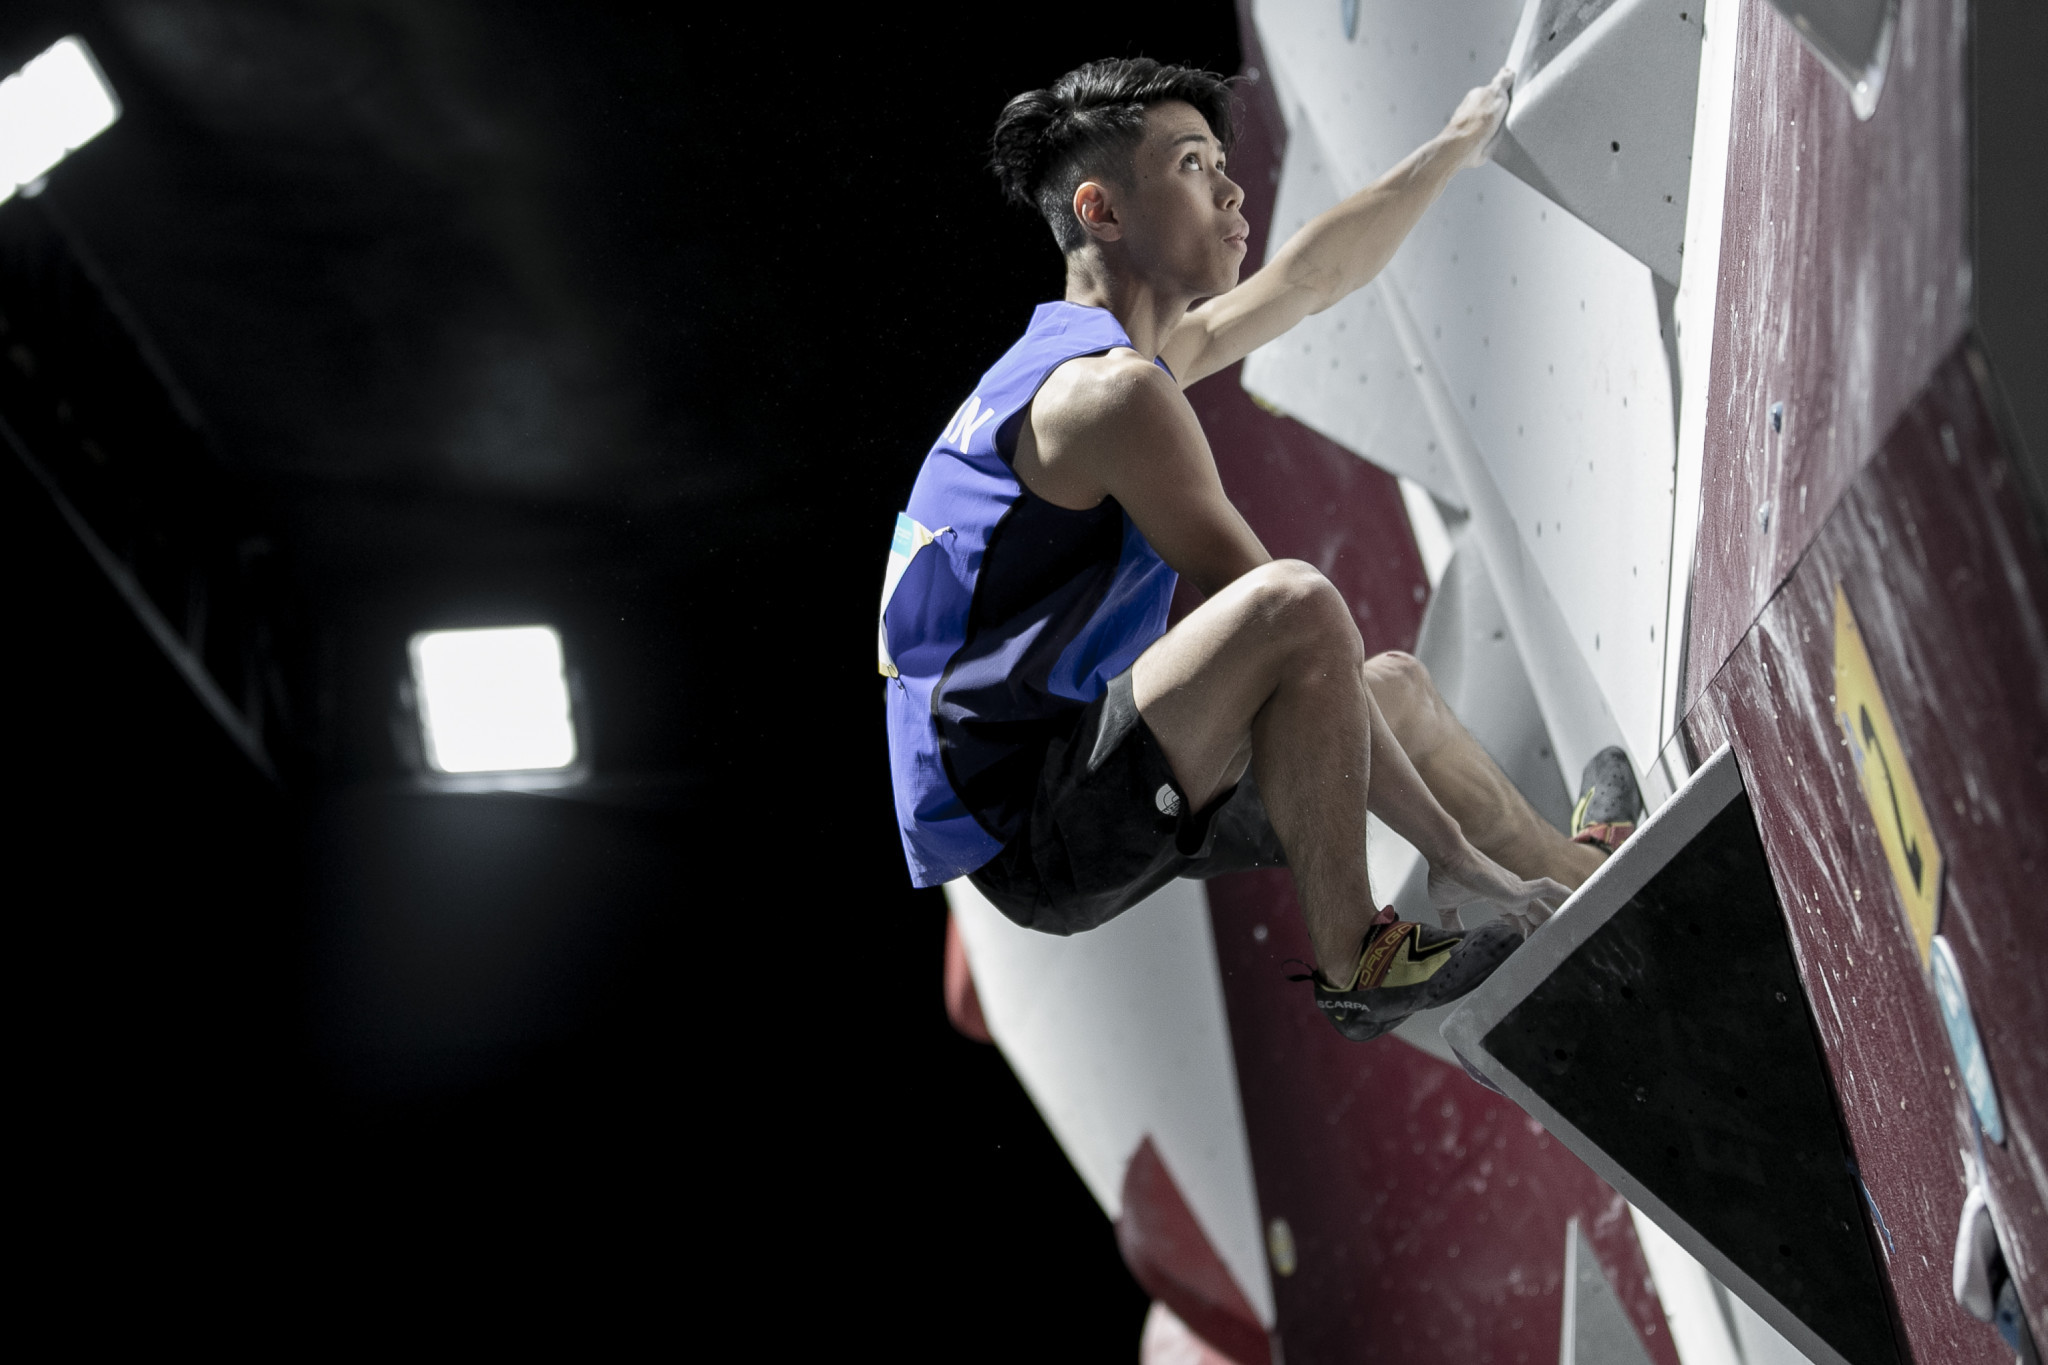 Japan's 20-year-old fomer world bouldering champion won gold at the ANOC World Beach Games ©ANOC World Beach Games